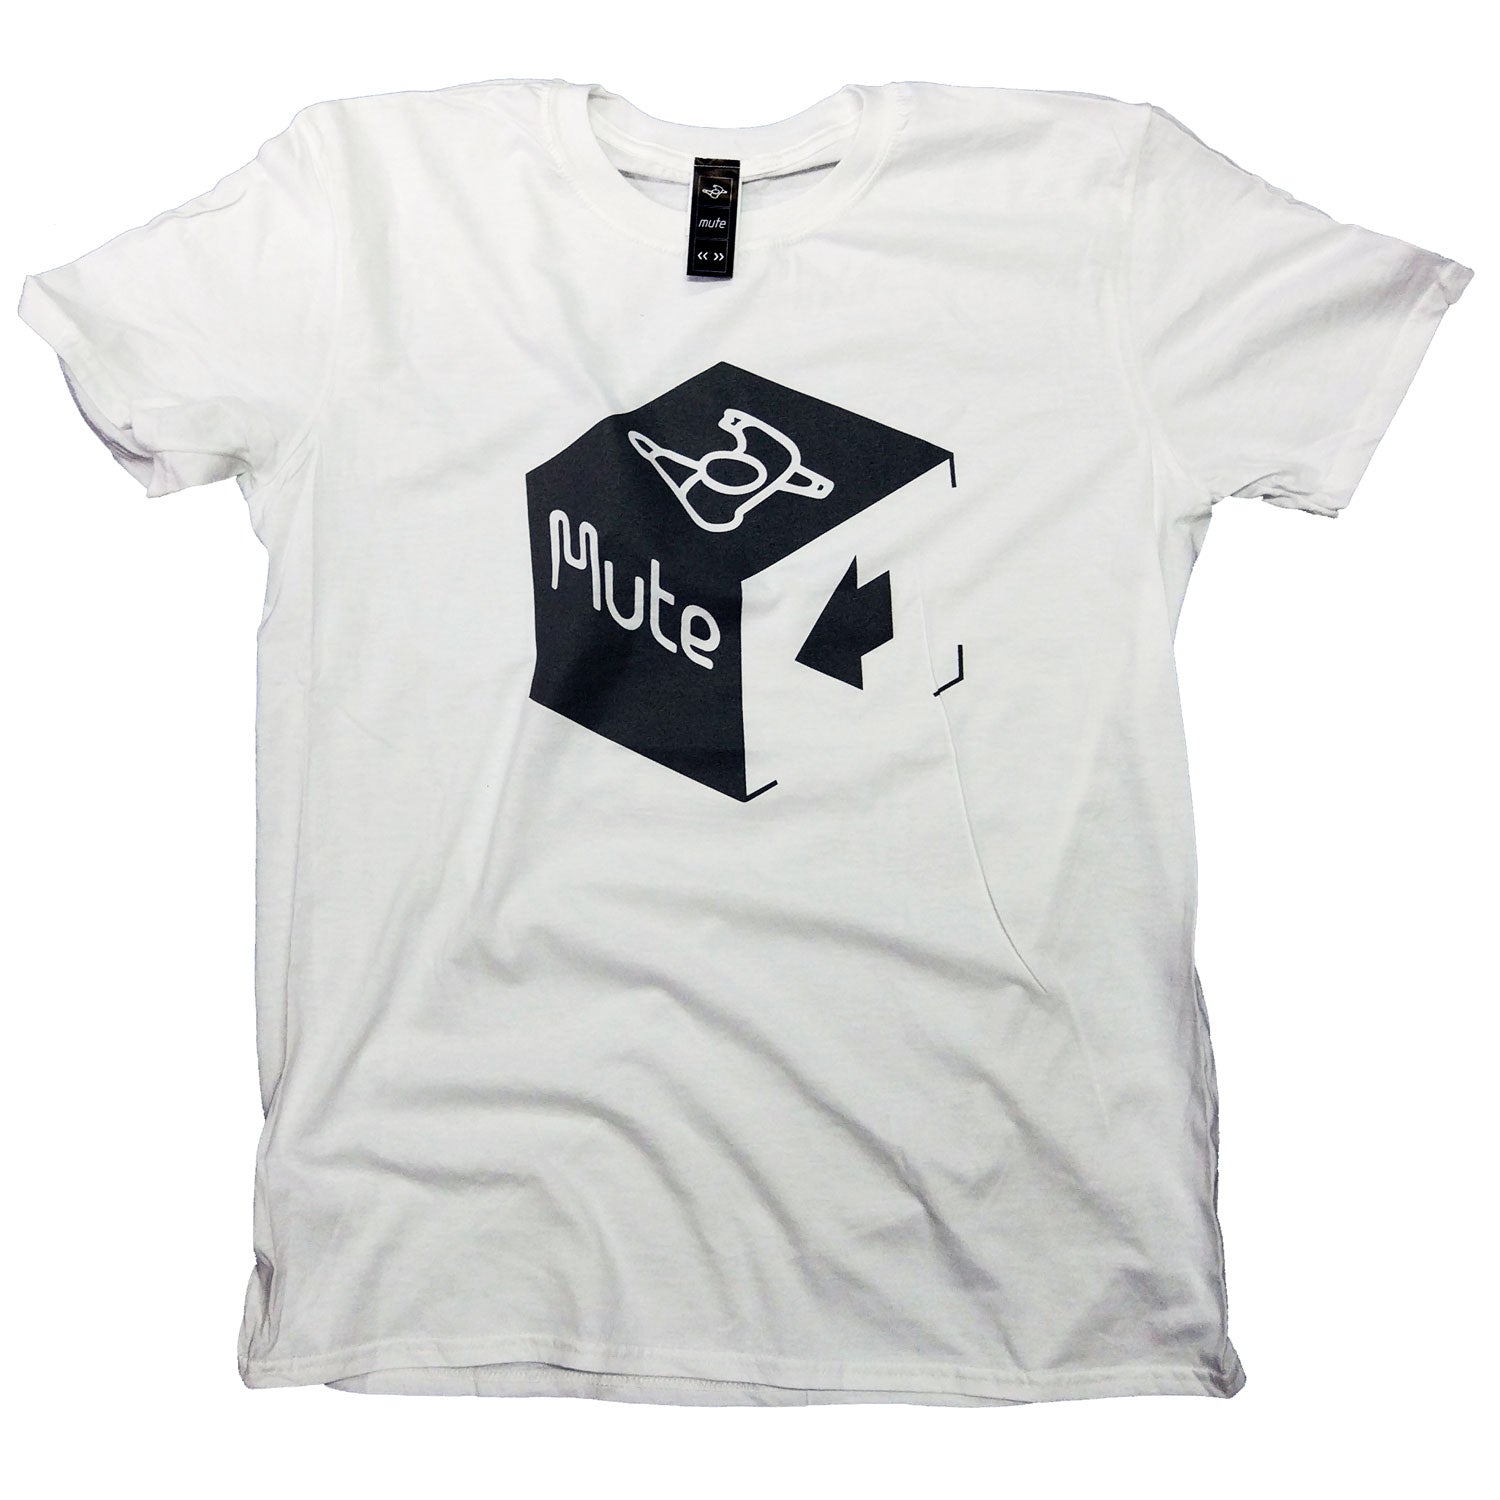 Mute Records T Shirt - White Cube 100% Official